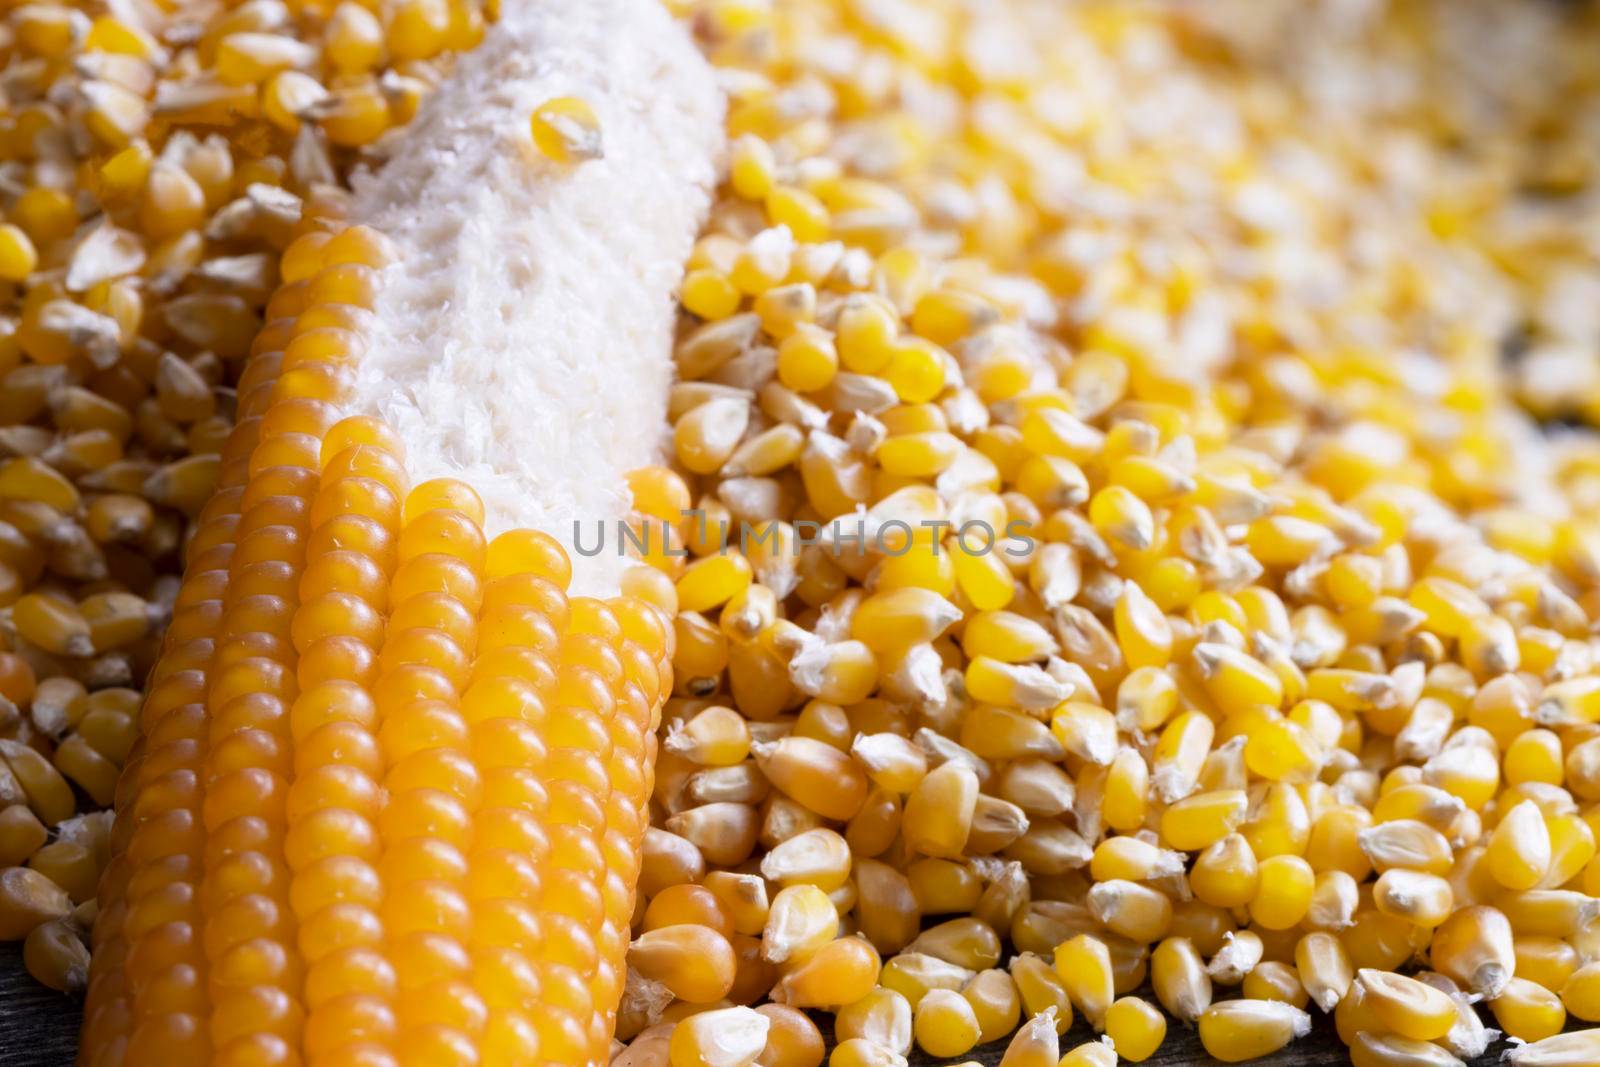 Popcorn on the cob with kernels partially removed lying in pile of kernels.